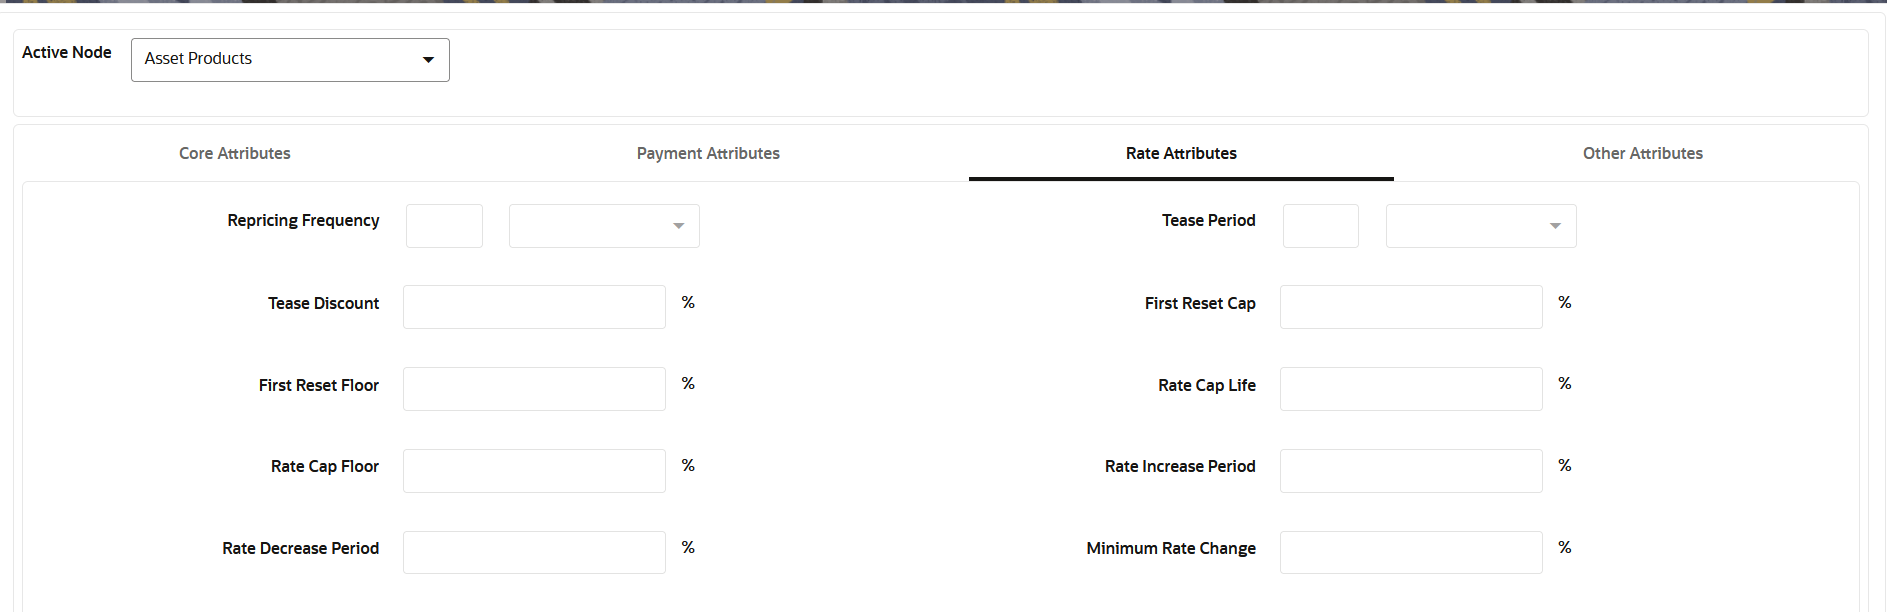 Rate Attributes Tab to define the Product Characteristic Rule